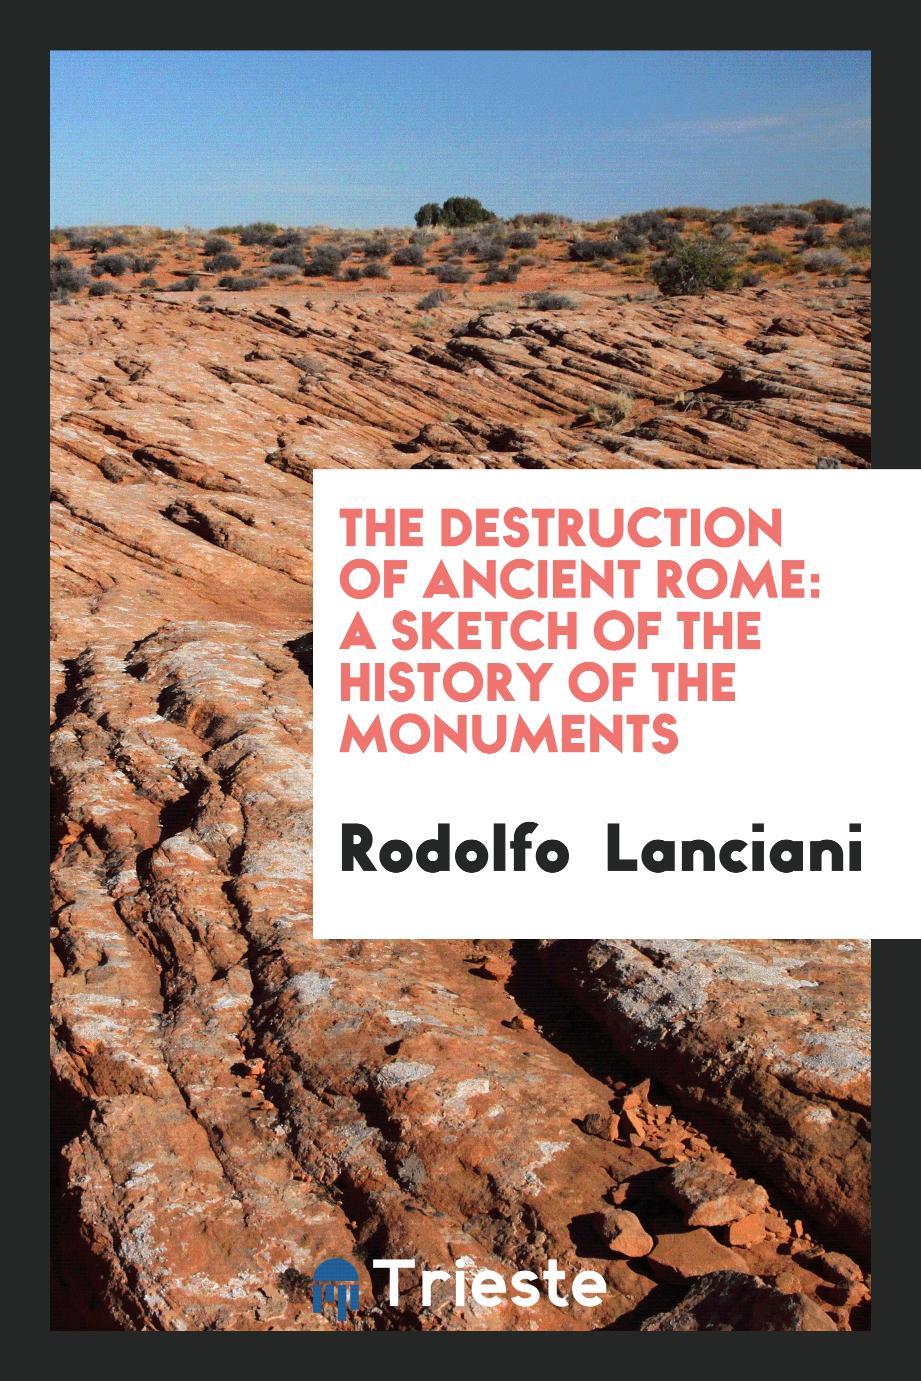 Rodolfo  Lanciani - The Destruction of Ancient Rome: A Sketch of the History of the Monuments